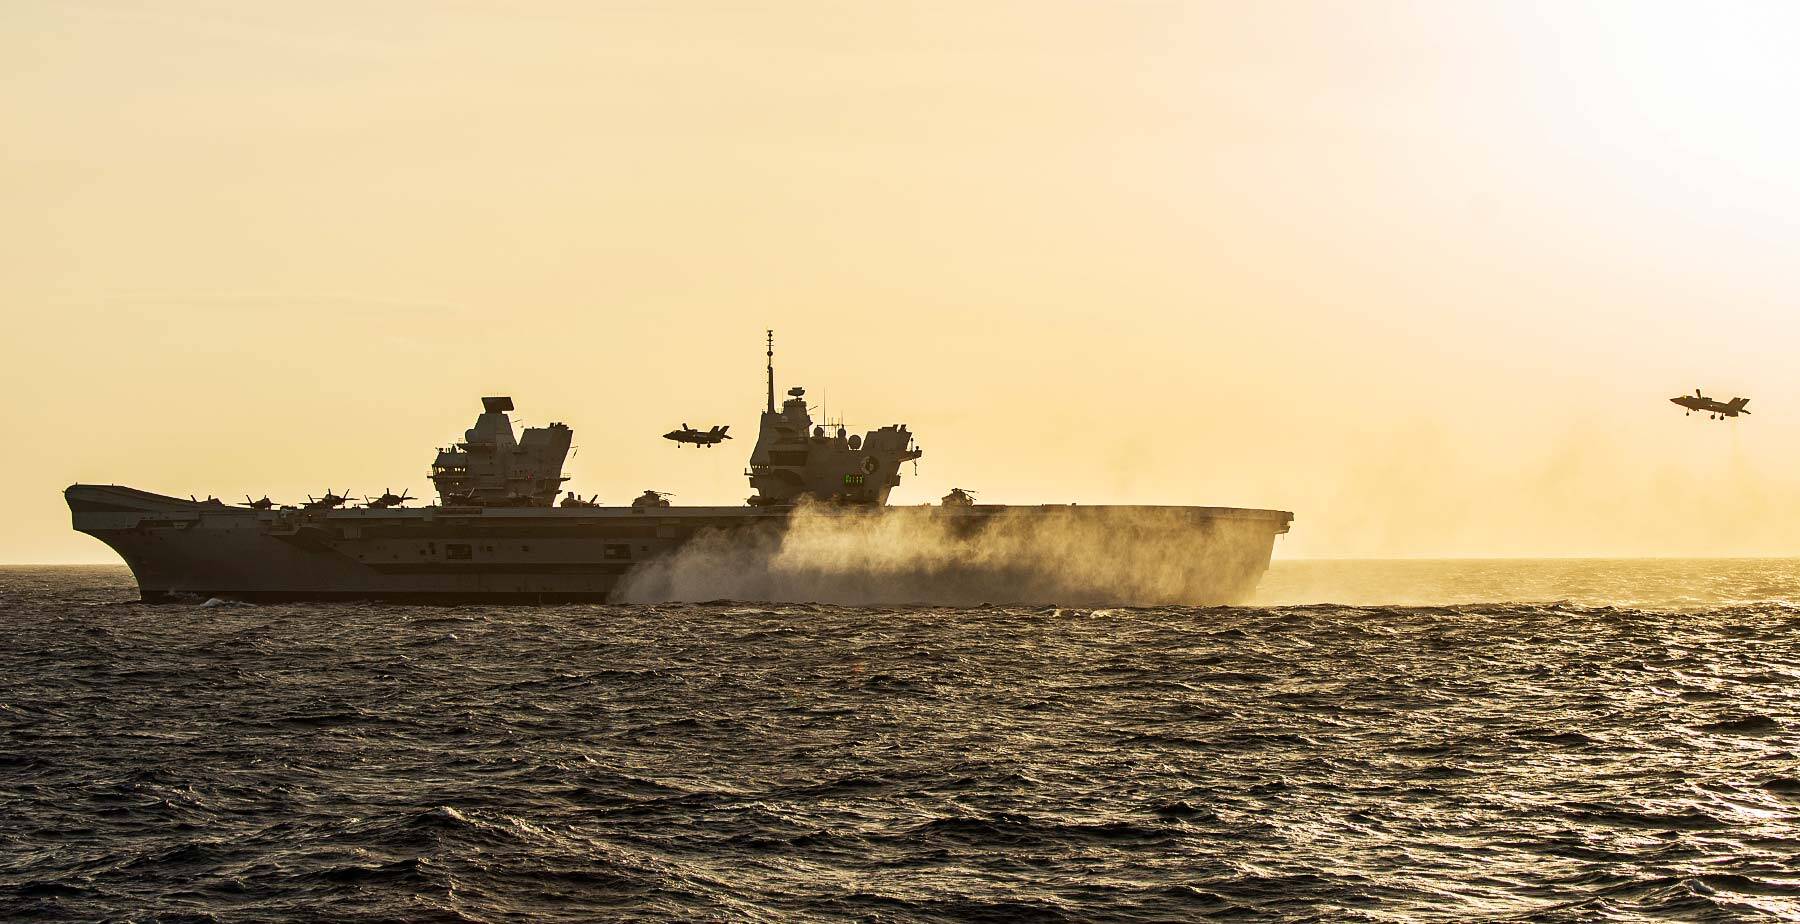 BBC to broadcast documentary covering the 2021 Carrier Strike Group deployment